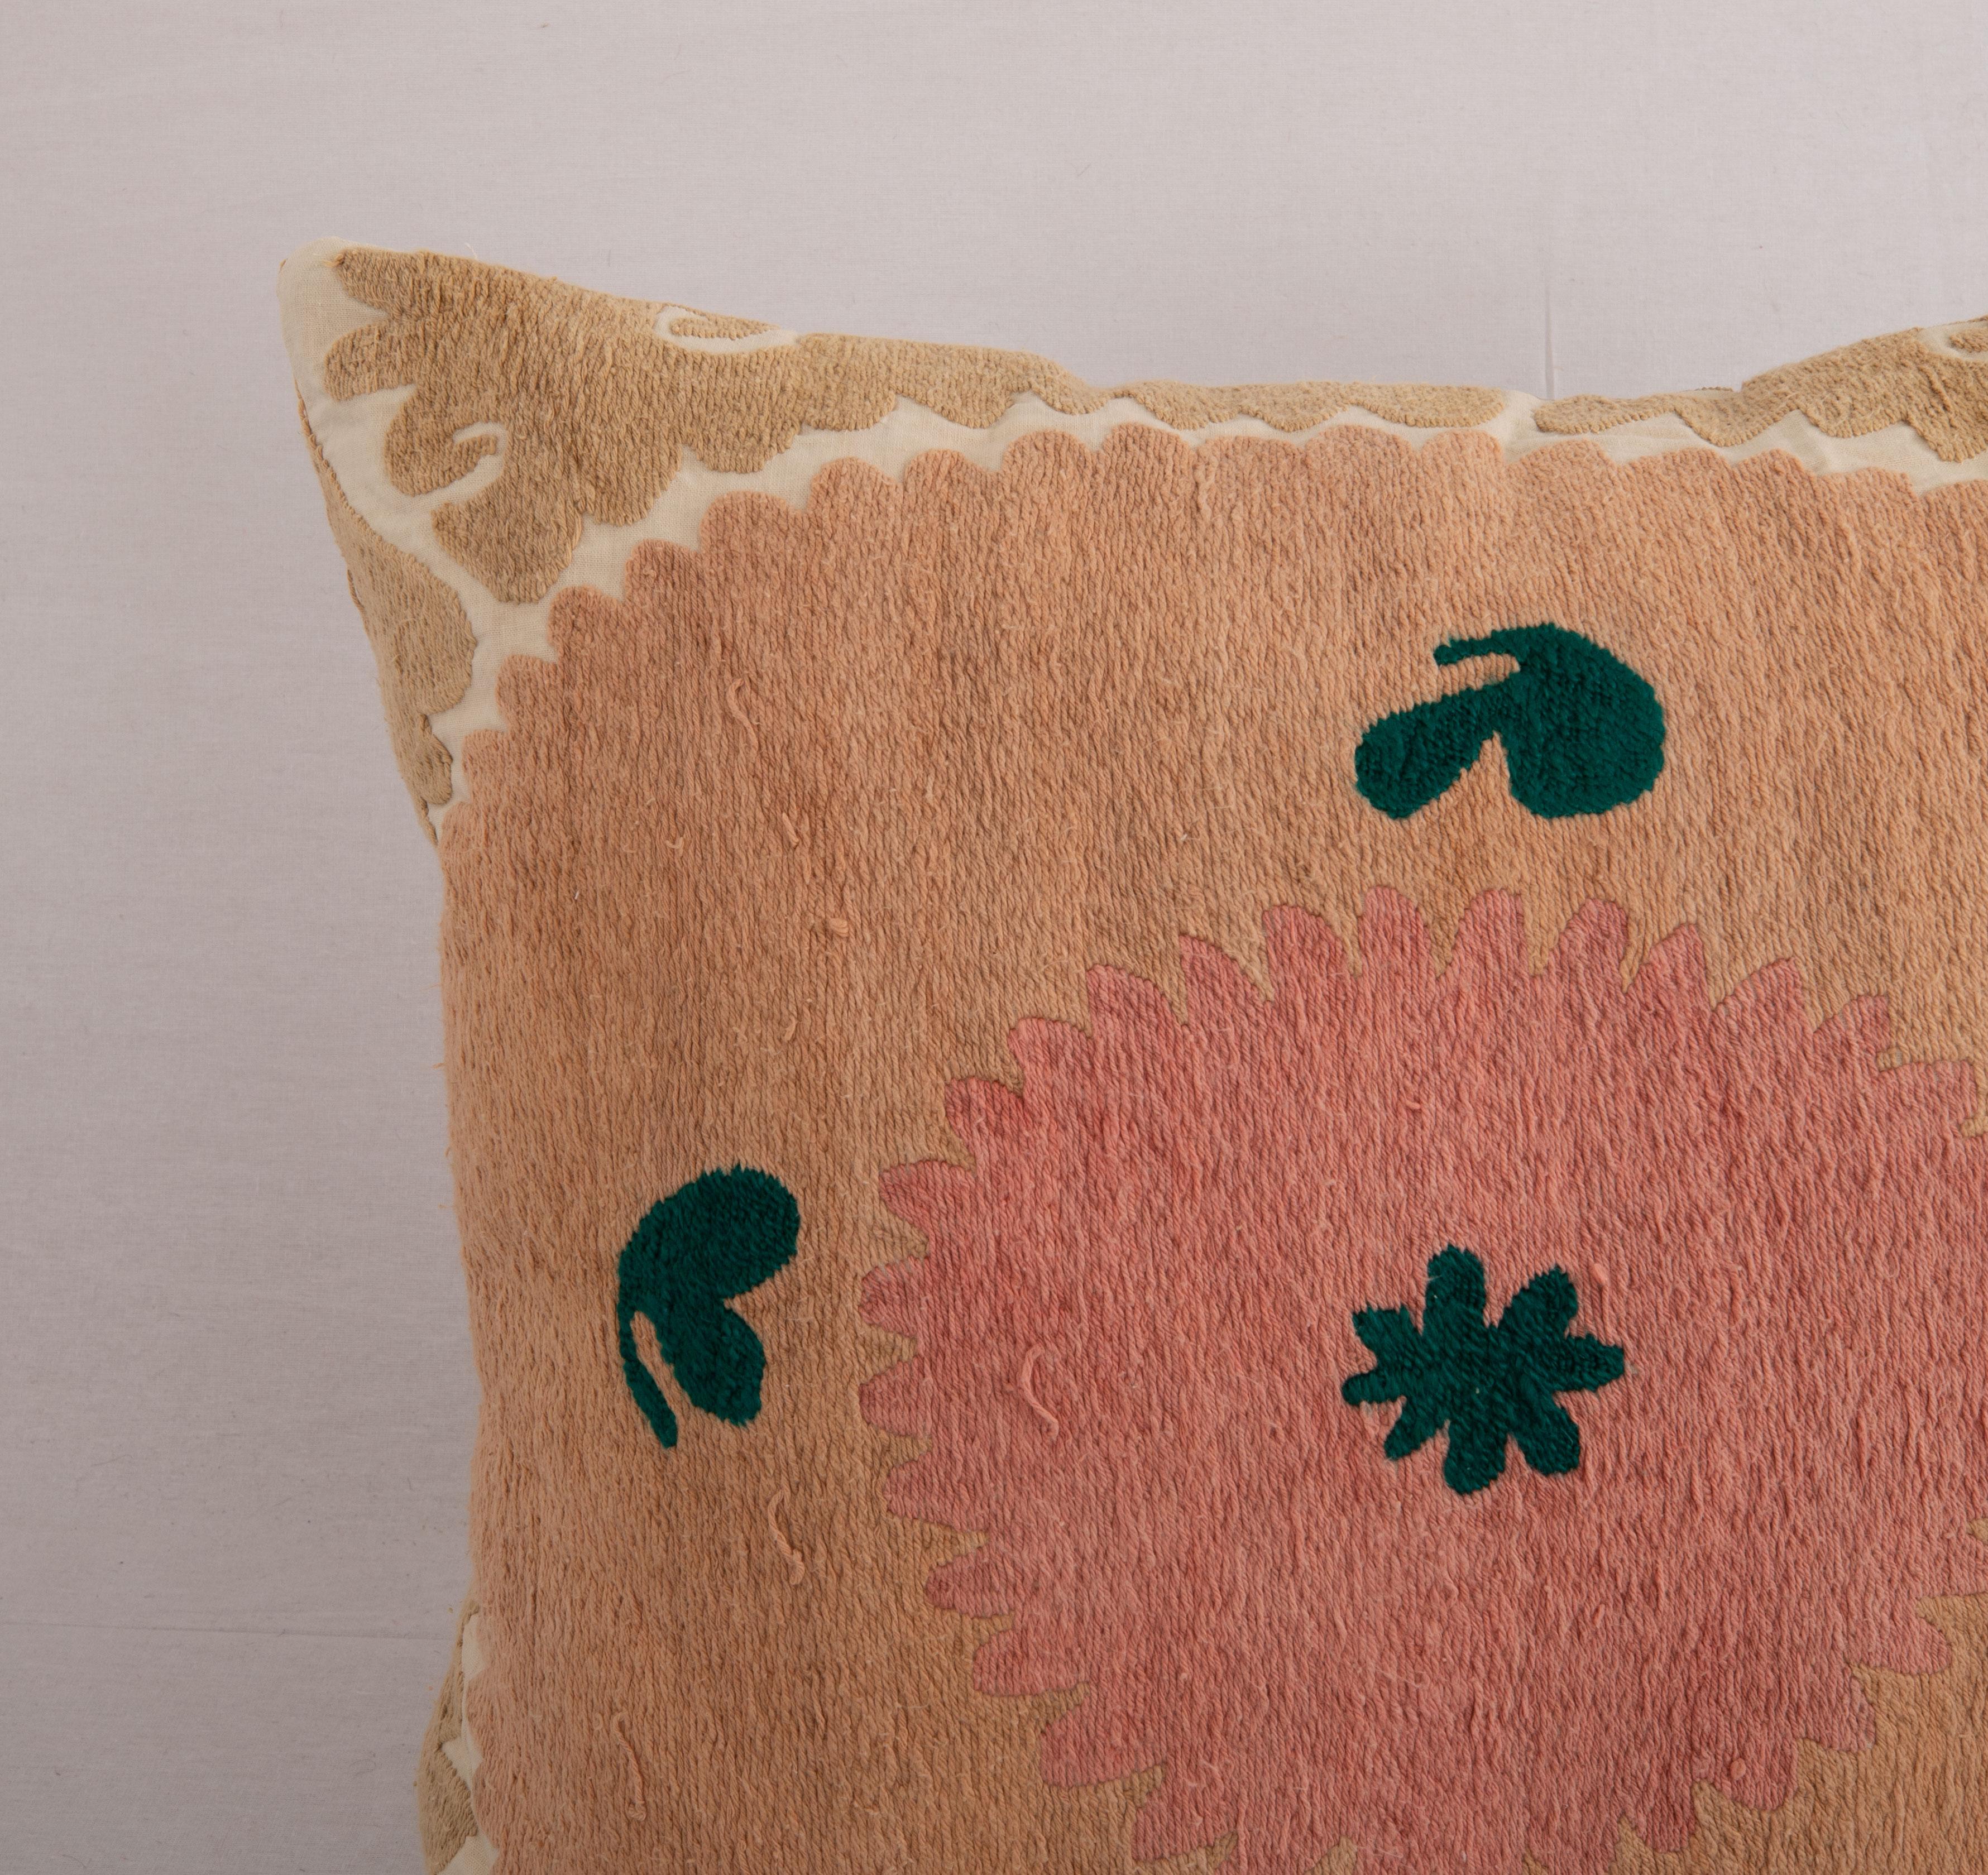 Embroidered Pillow Cover Made from a Mid 20th C. Suzani, Uzbekistan For Sale